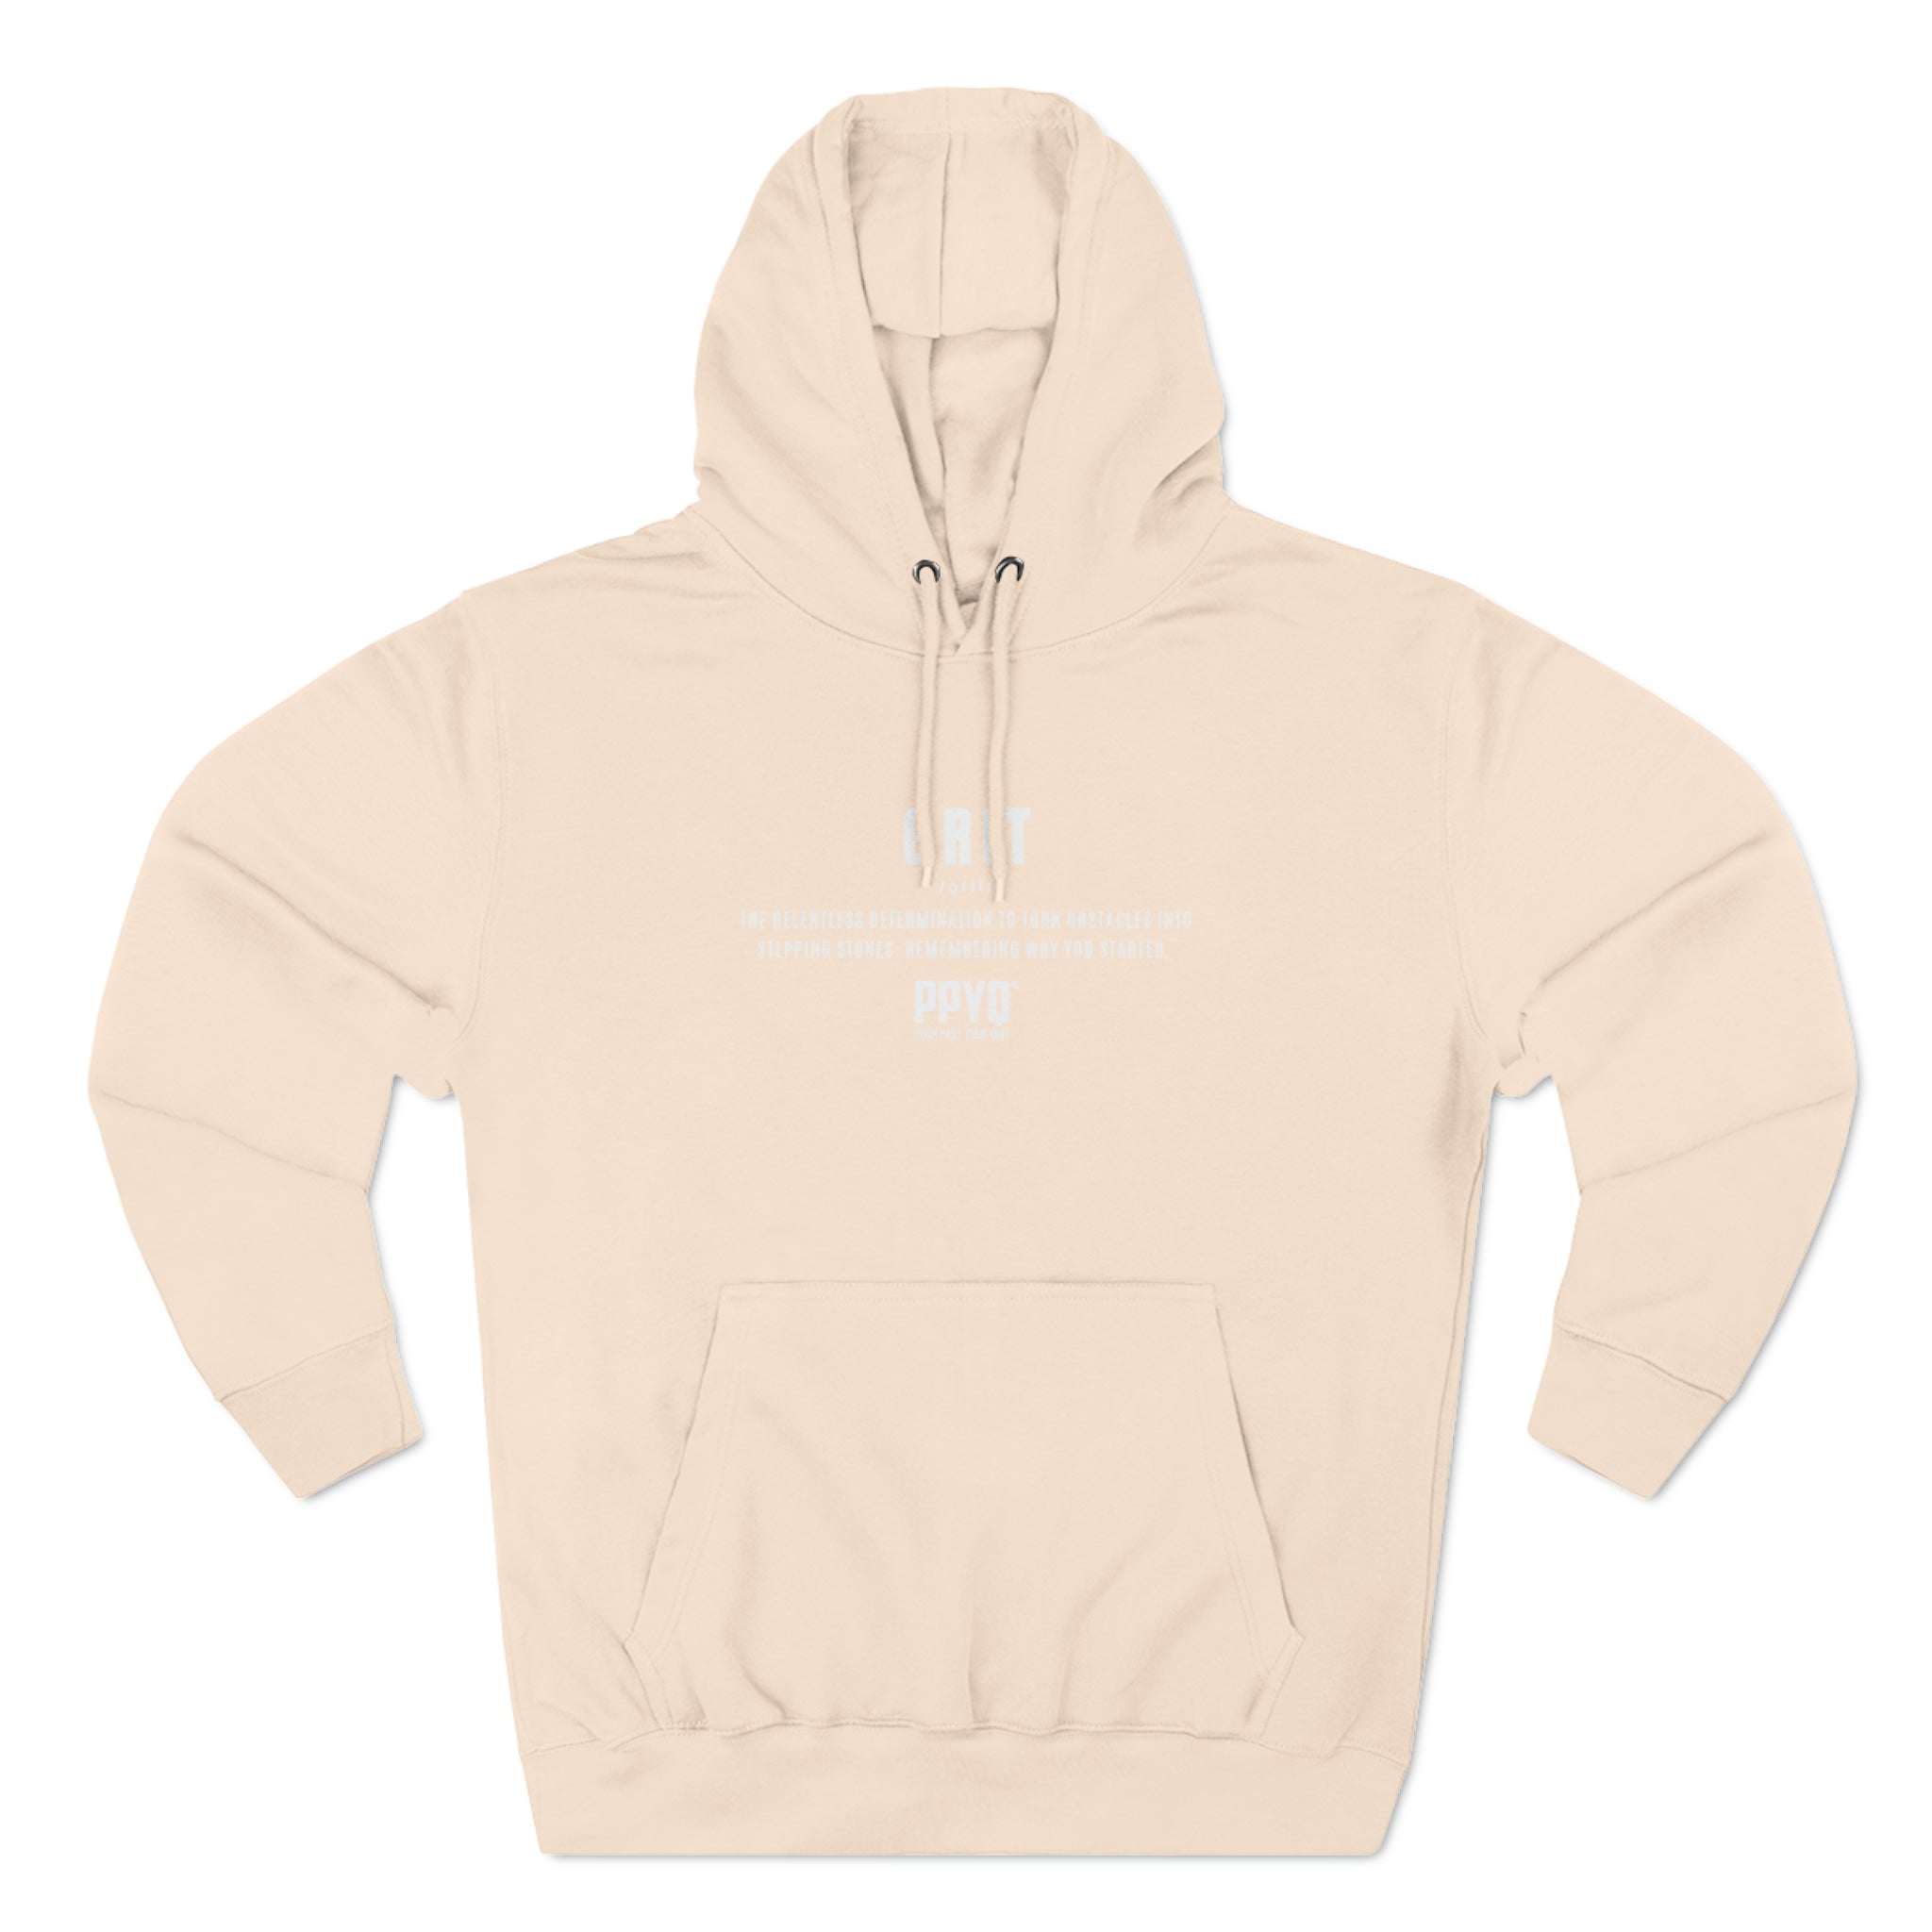 Grit PPYQ® Defined Premium Pullover Hoodie